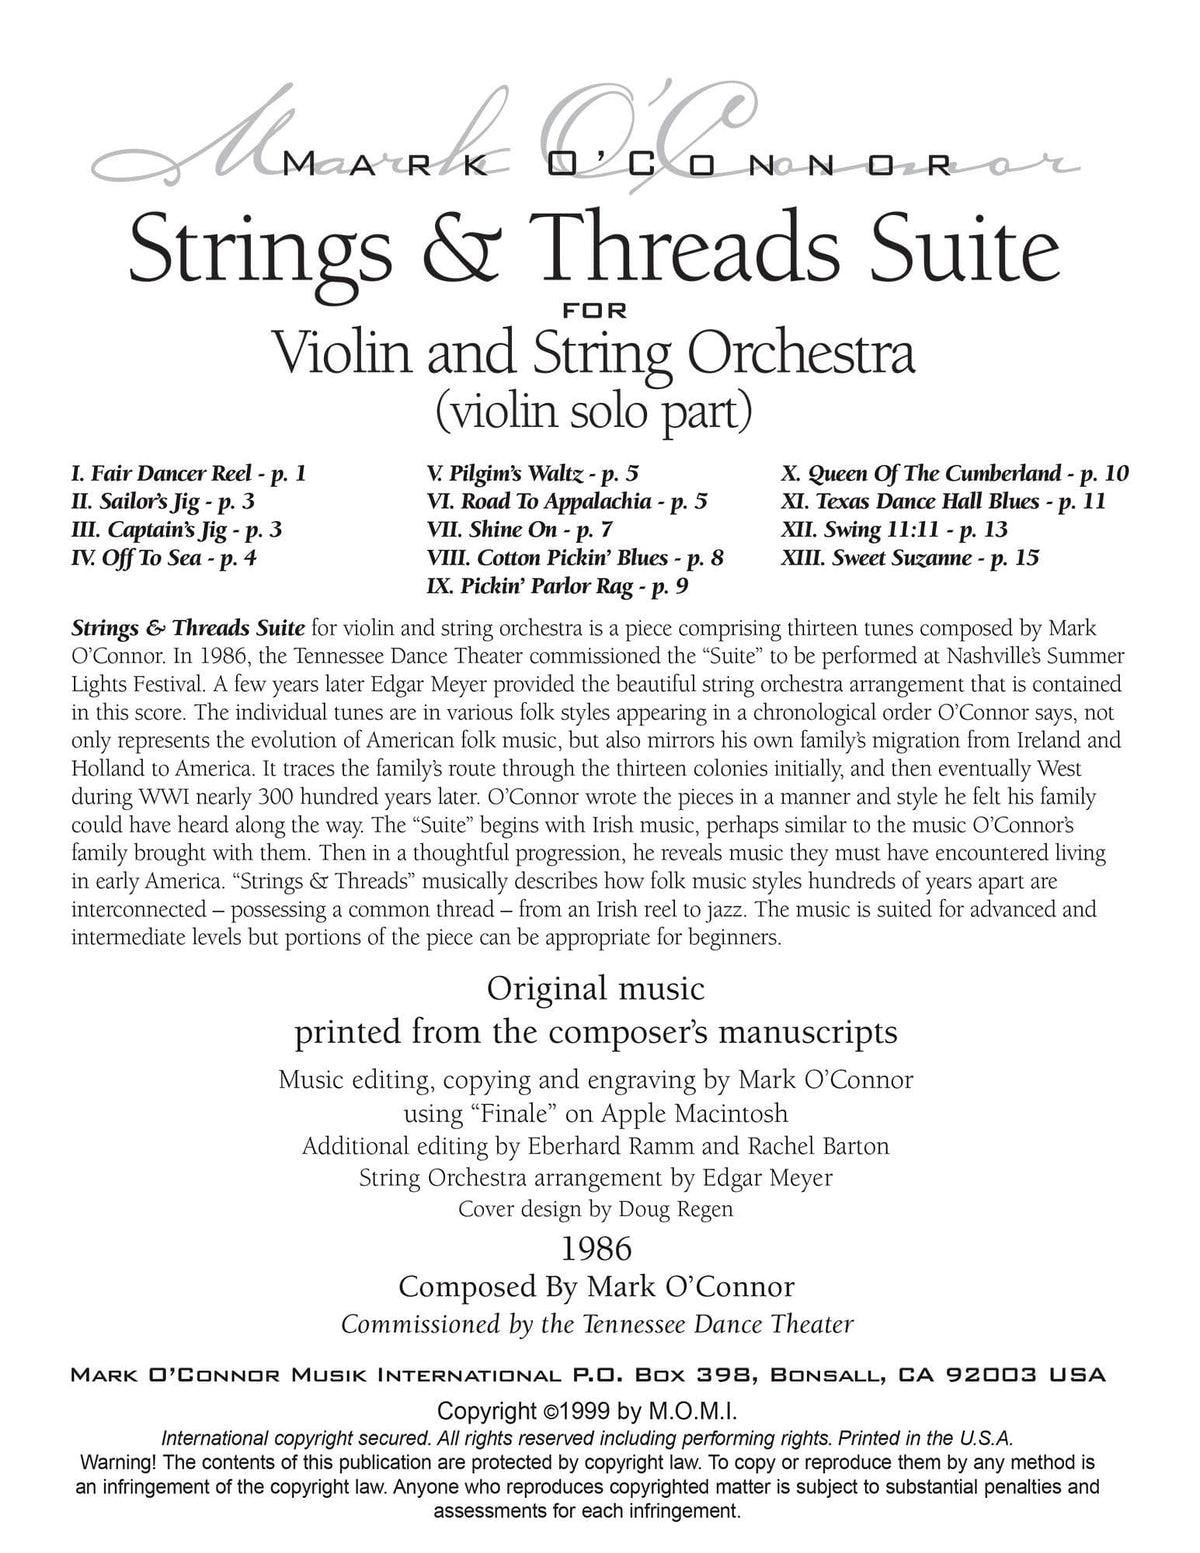 O'Connor, Mark - Strings & Threads Suite for Violin and String Orchestra - Violin Solo - Digital Download